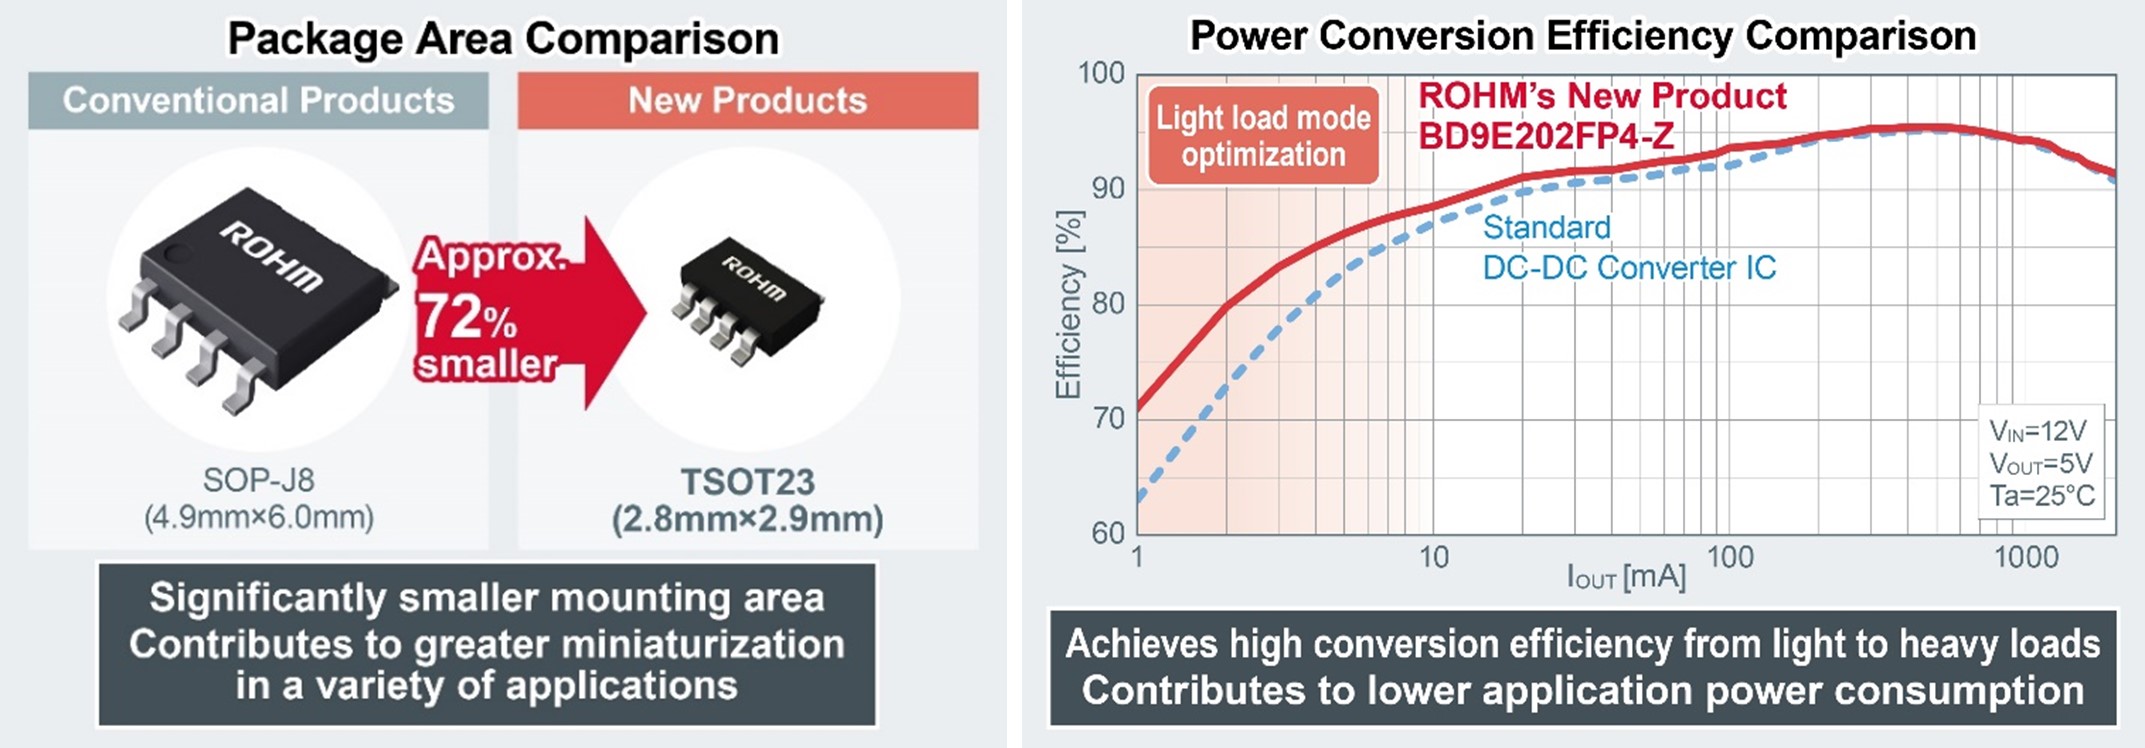 Smaller mounting area means greater miniaturization; high conversion efficiency means lower application power consumption